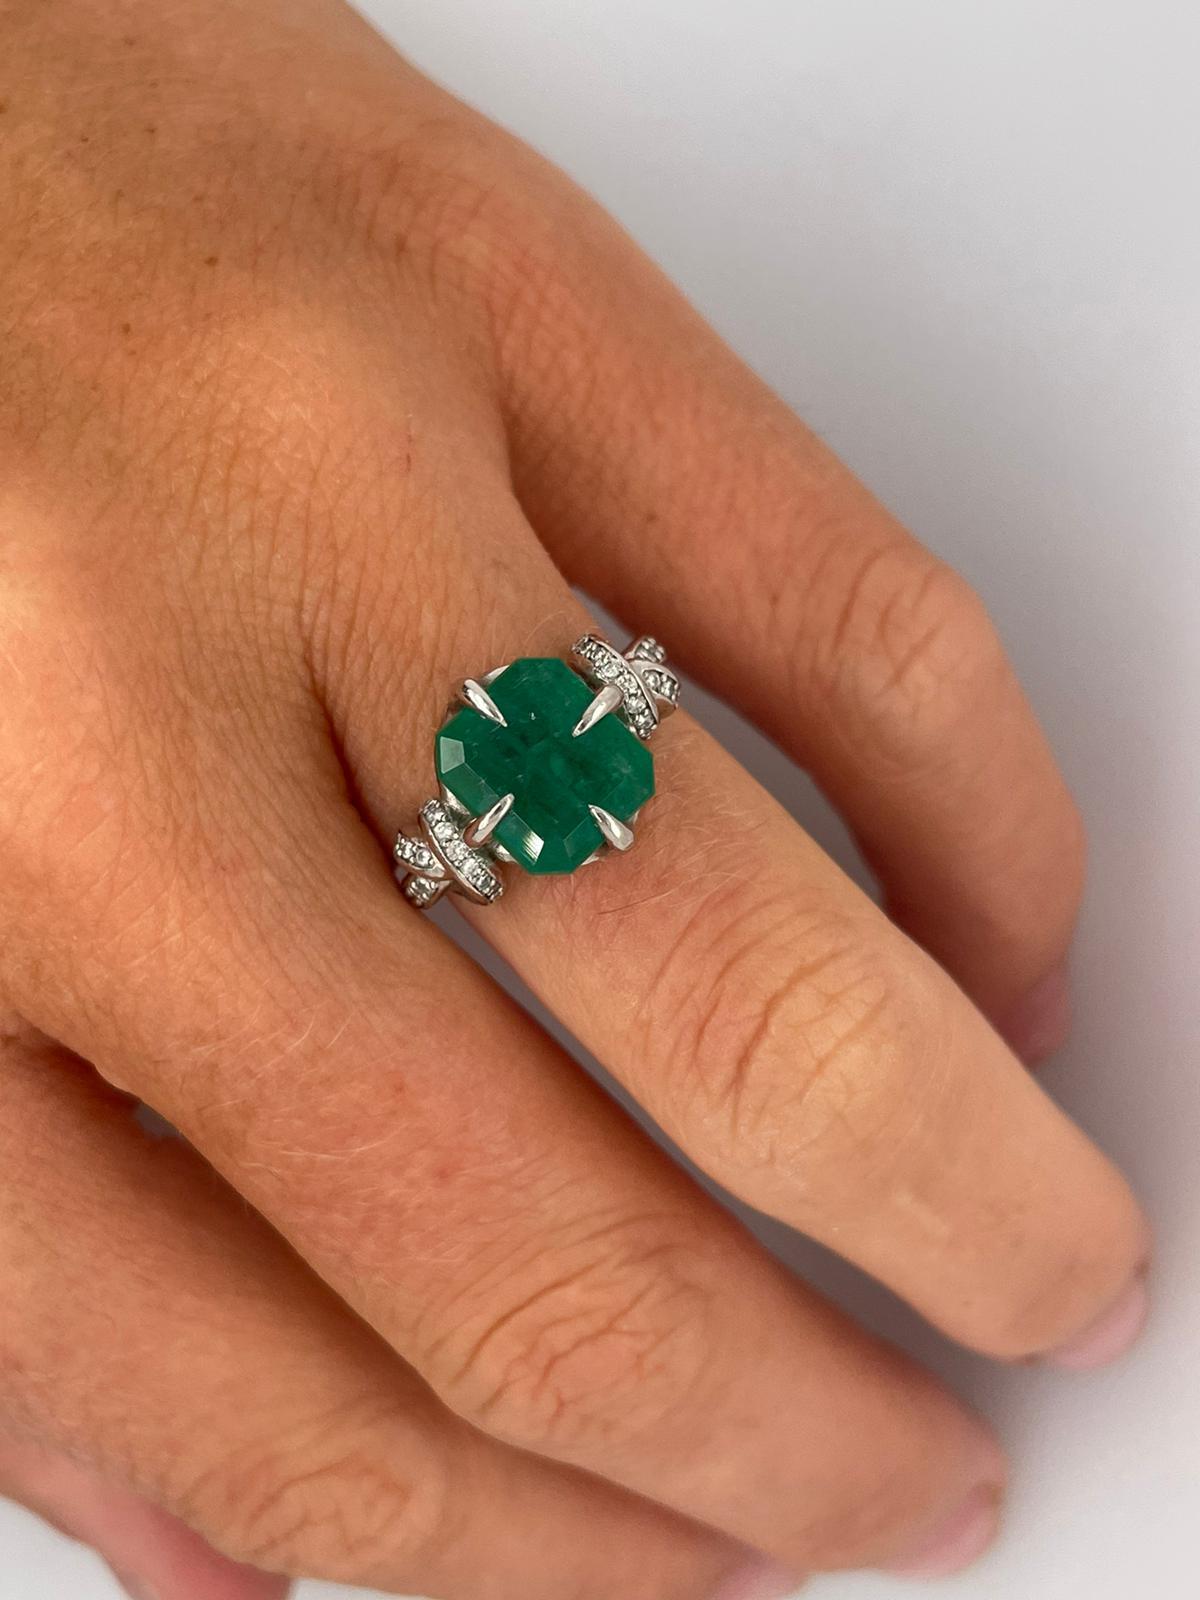 For Sale:  4ct Emerald solitaire in platinum with diamond knots  4